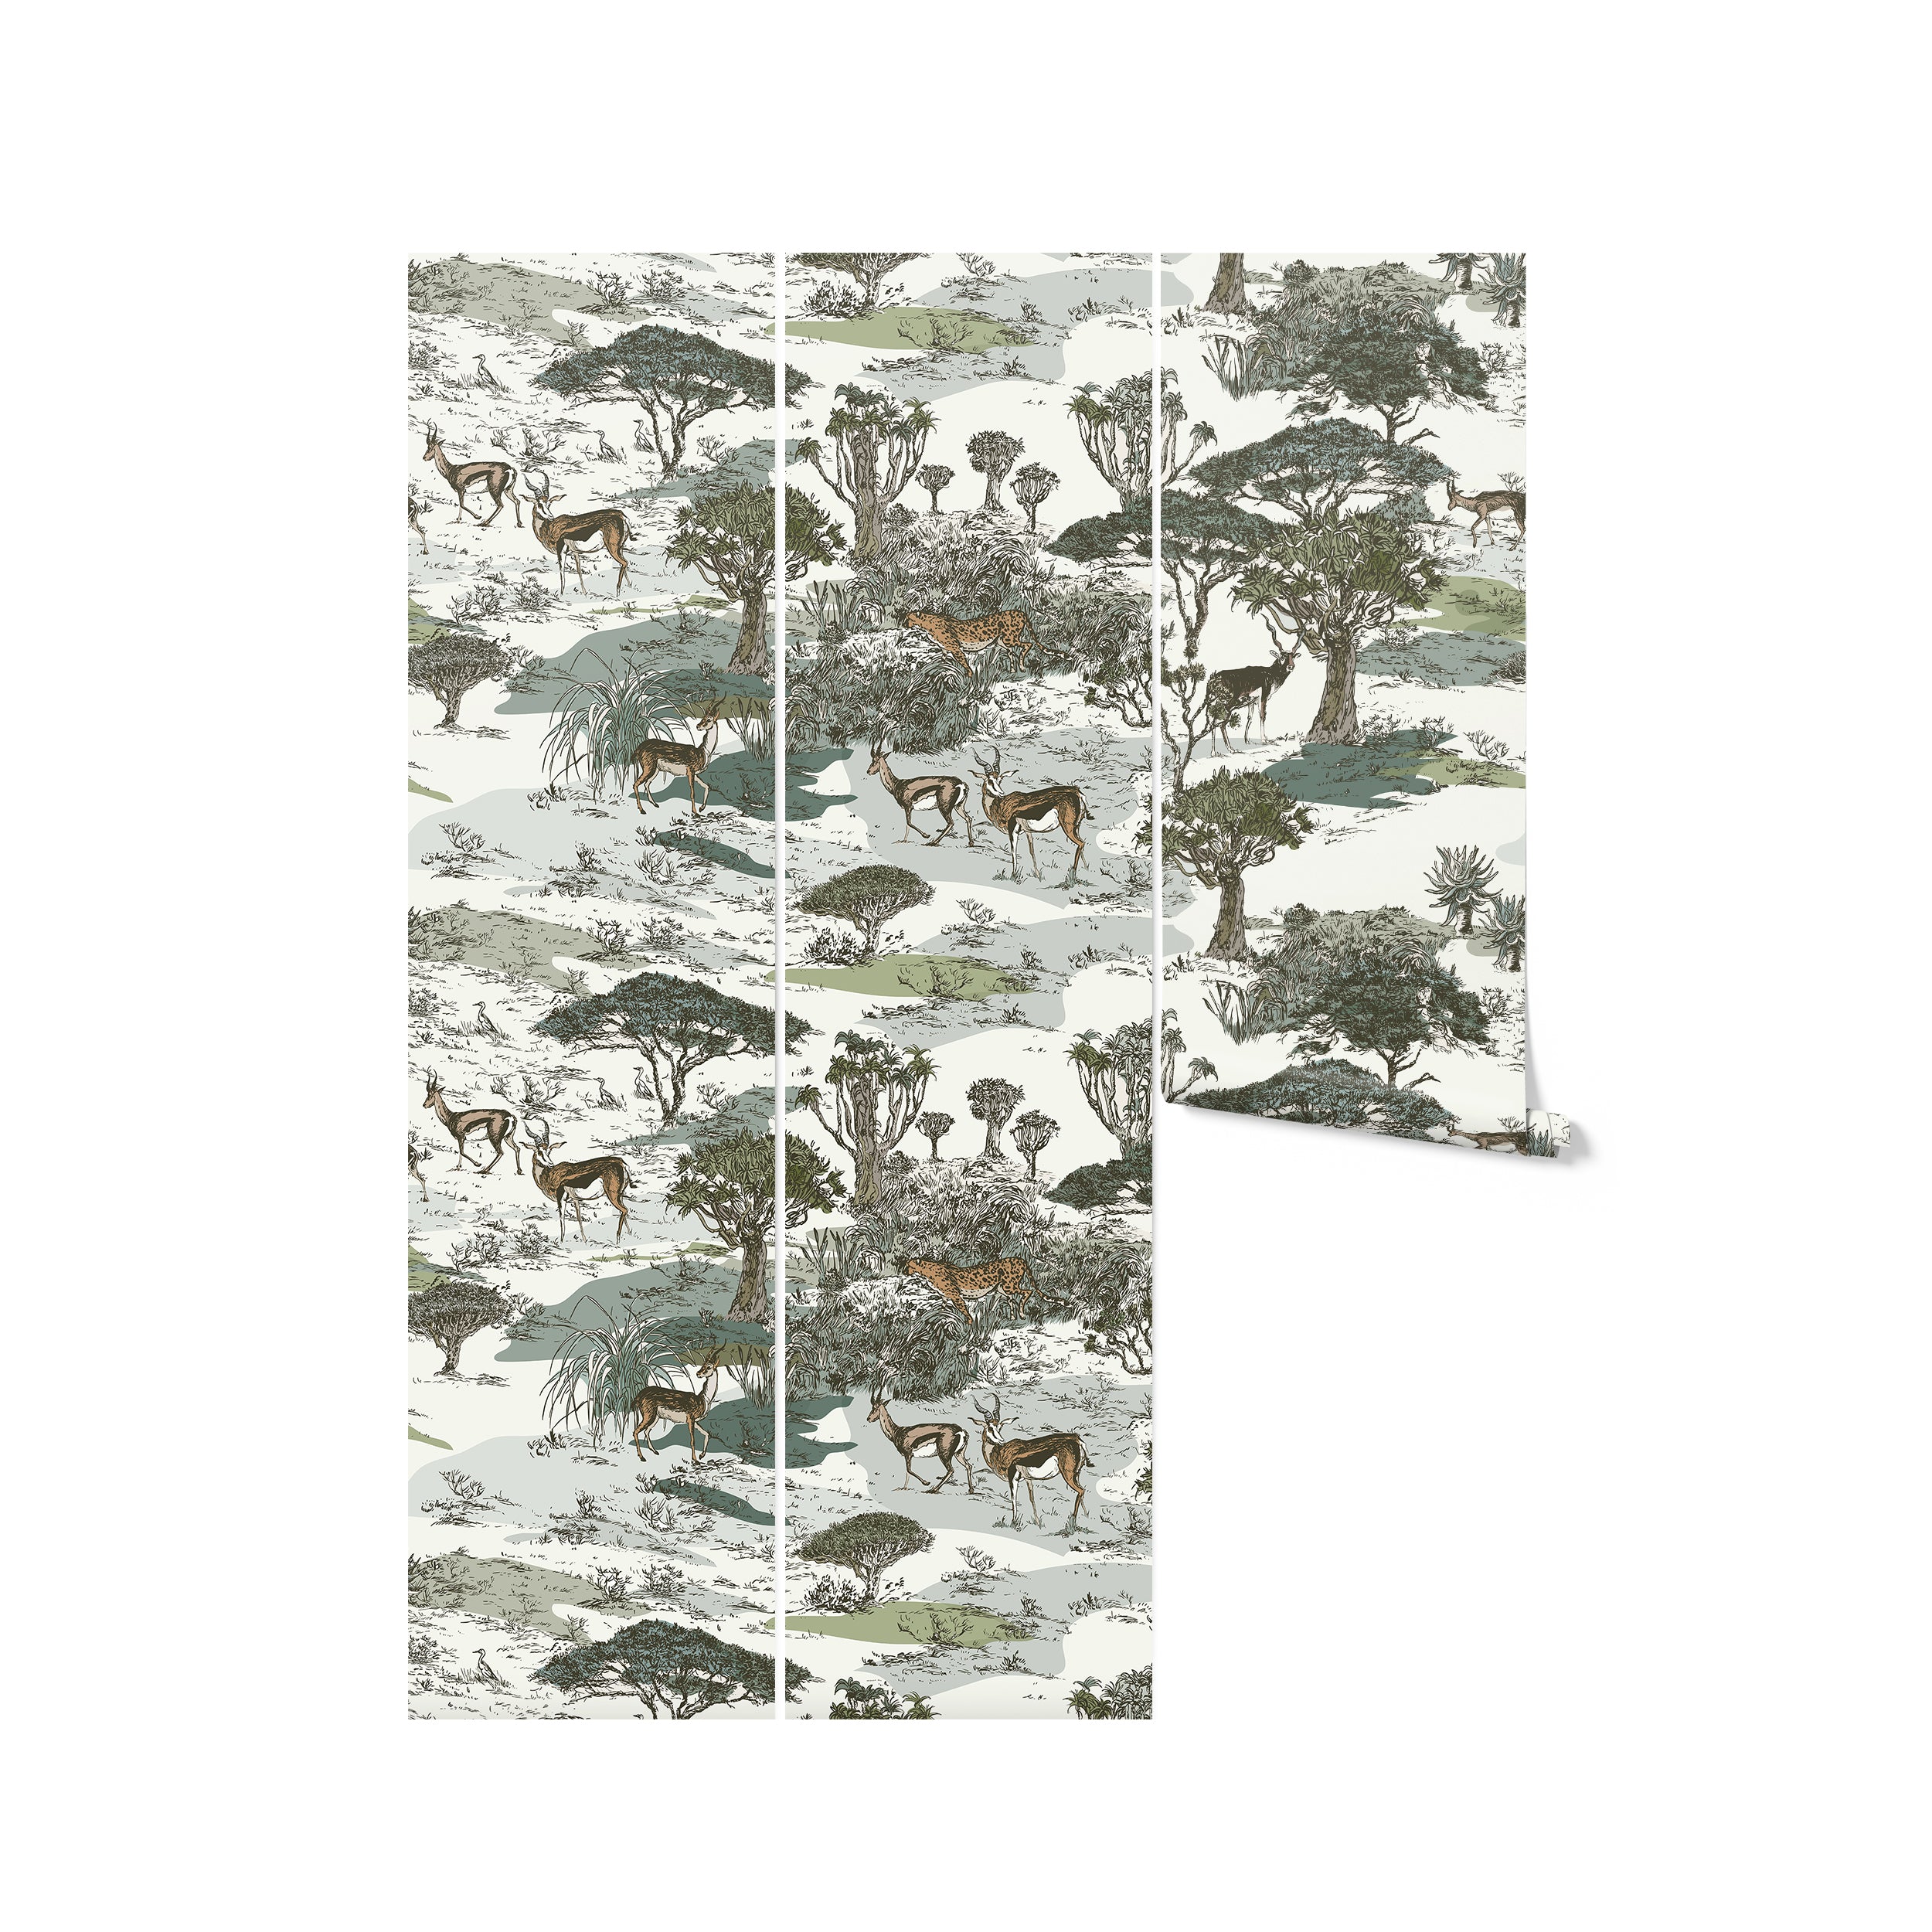 An elegant, detailed wallpaper mural showcasing a savanna scene with a leopard and impalas among various trees and shrubs. The colors are a blend of muted greens, browns, and greys, creating a peaceful natural ambiance.